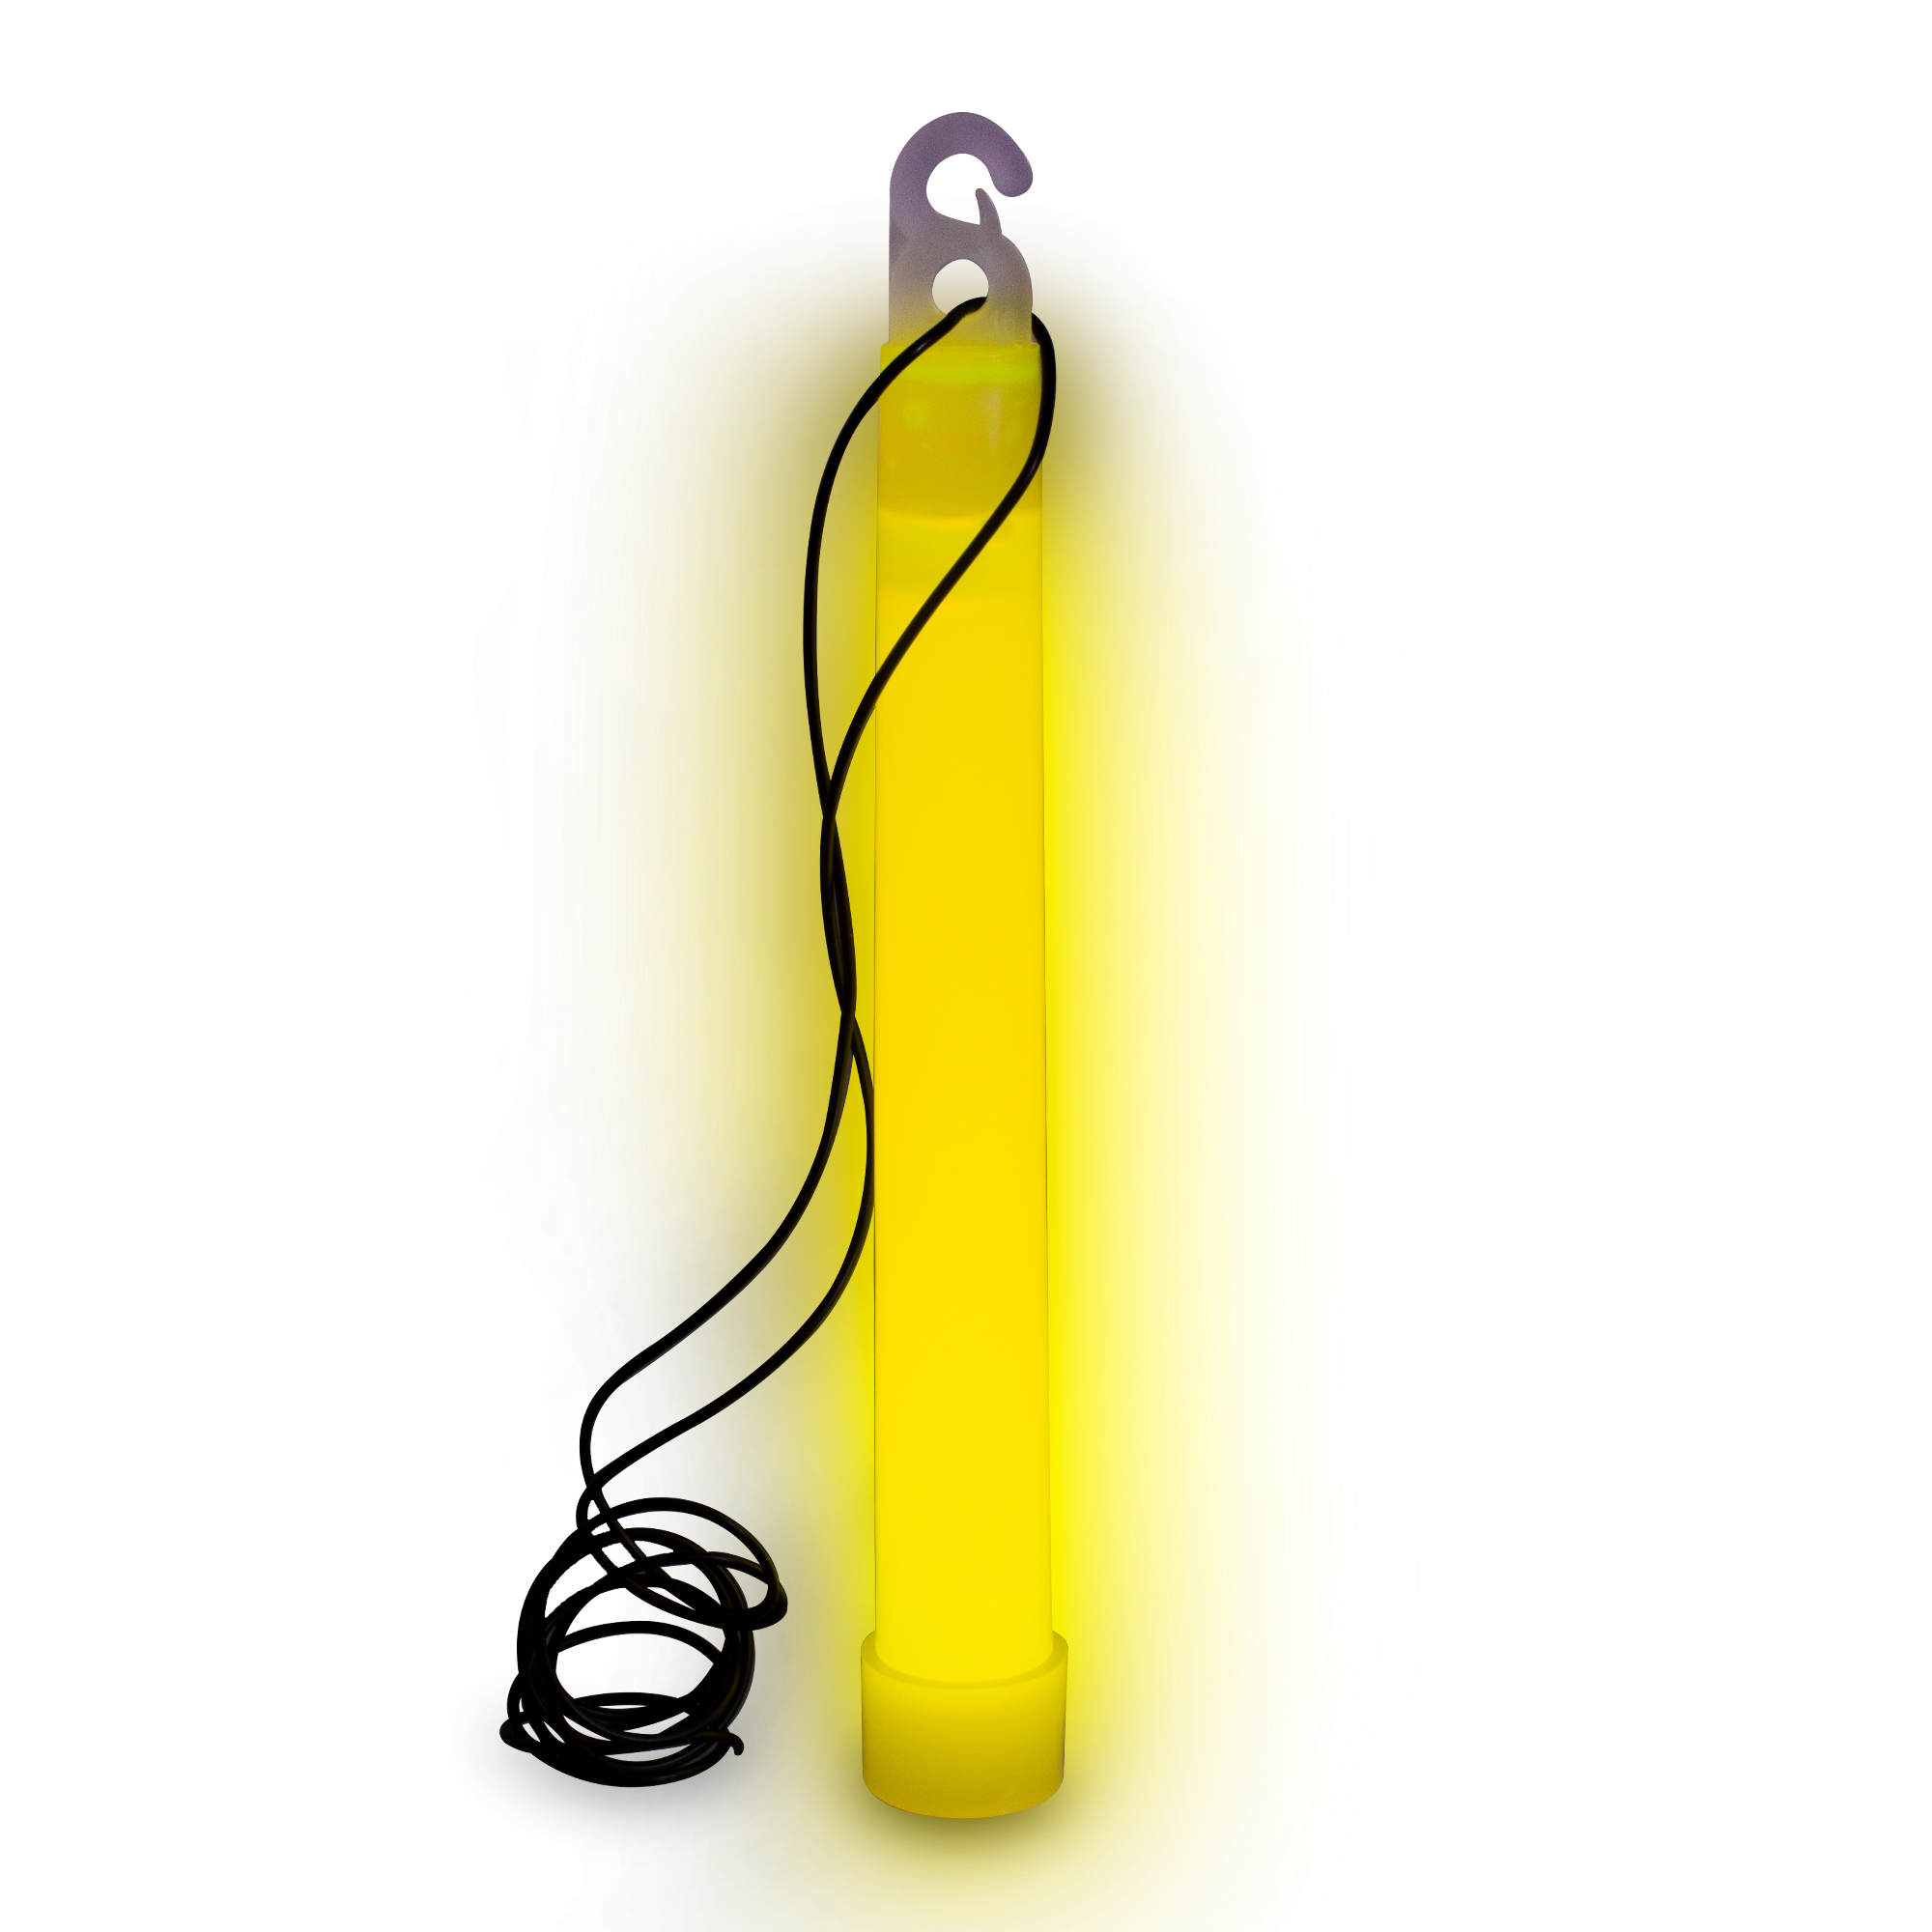 lot 12pc yellow new 3 function LED flash glow light sticks,w/ lanyard&clip,party 